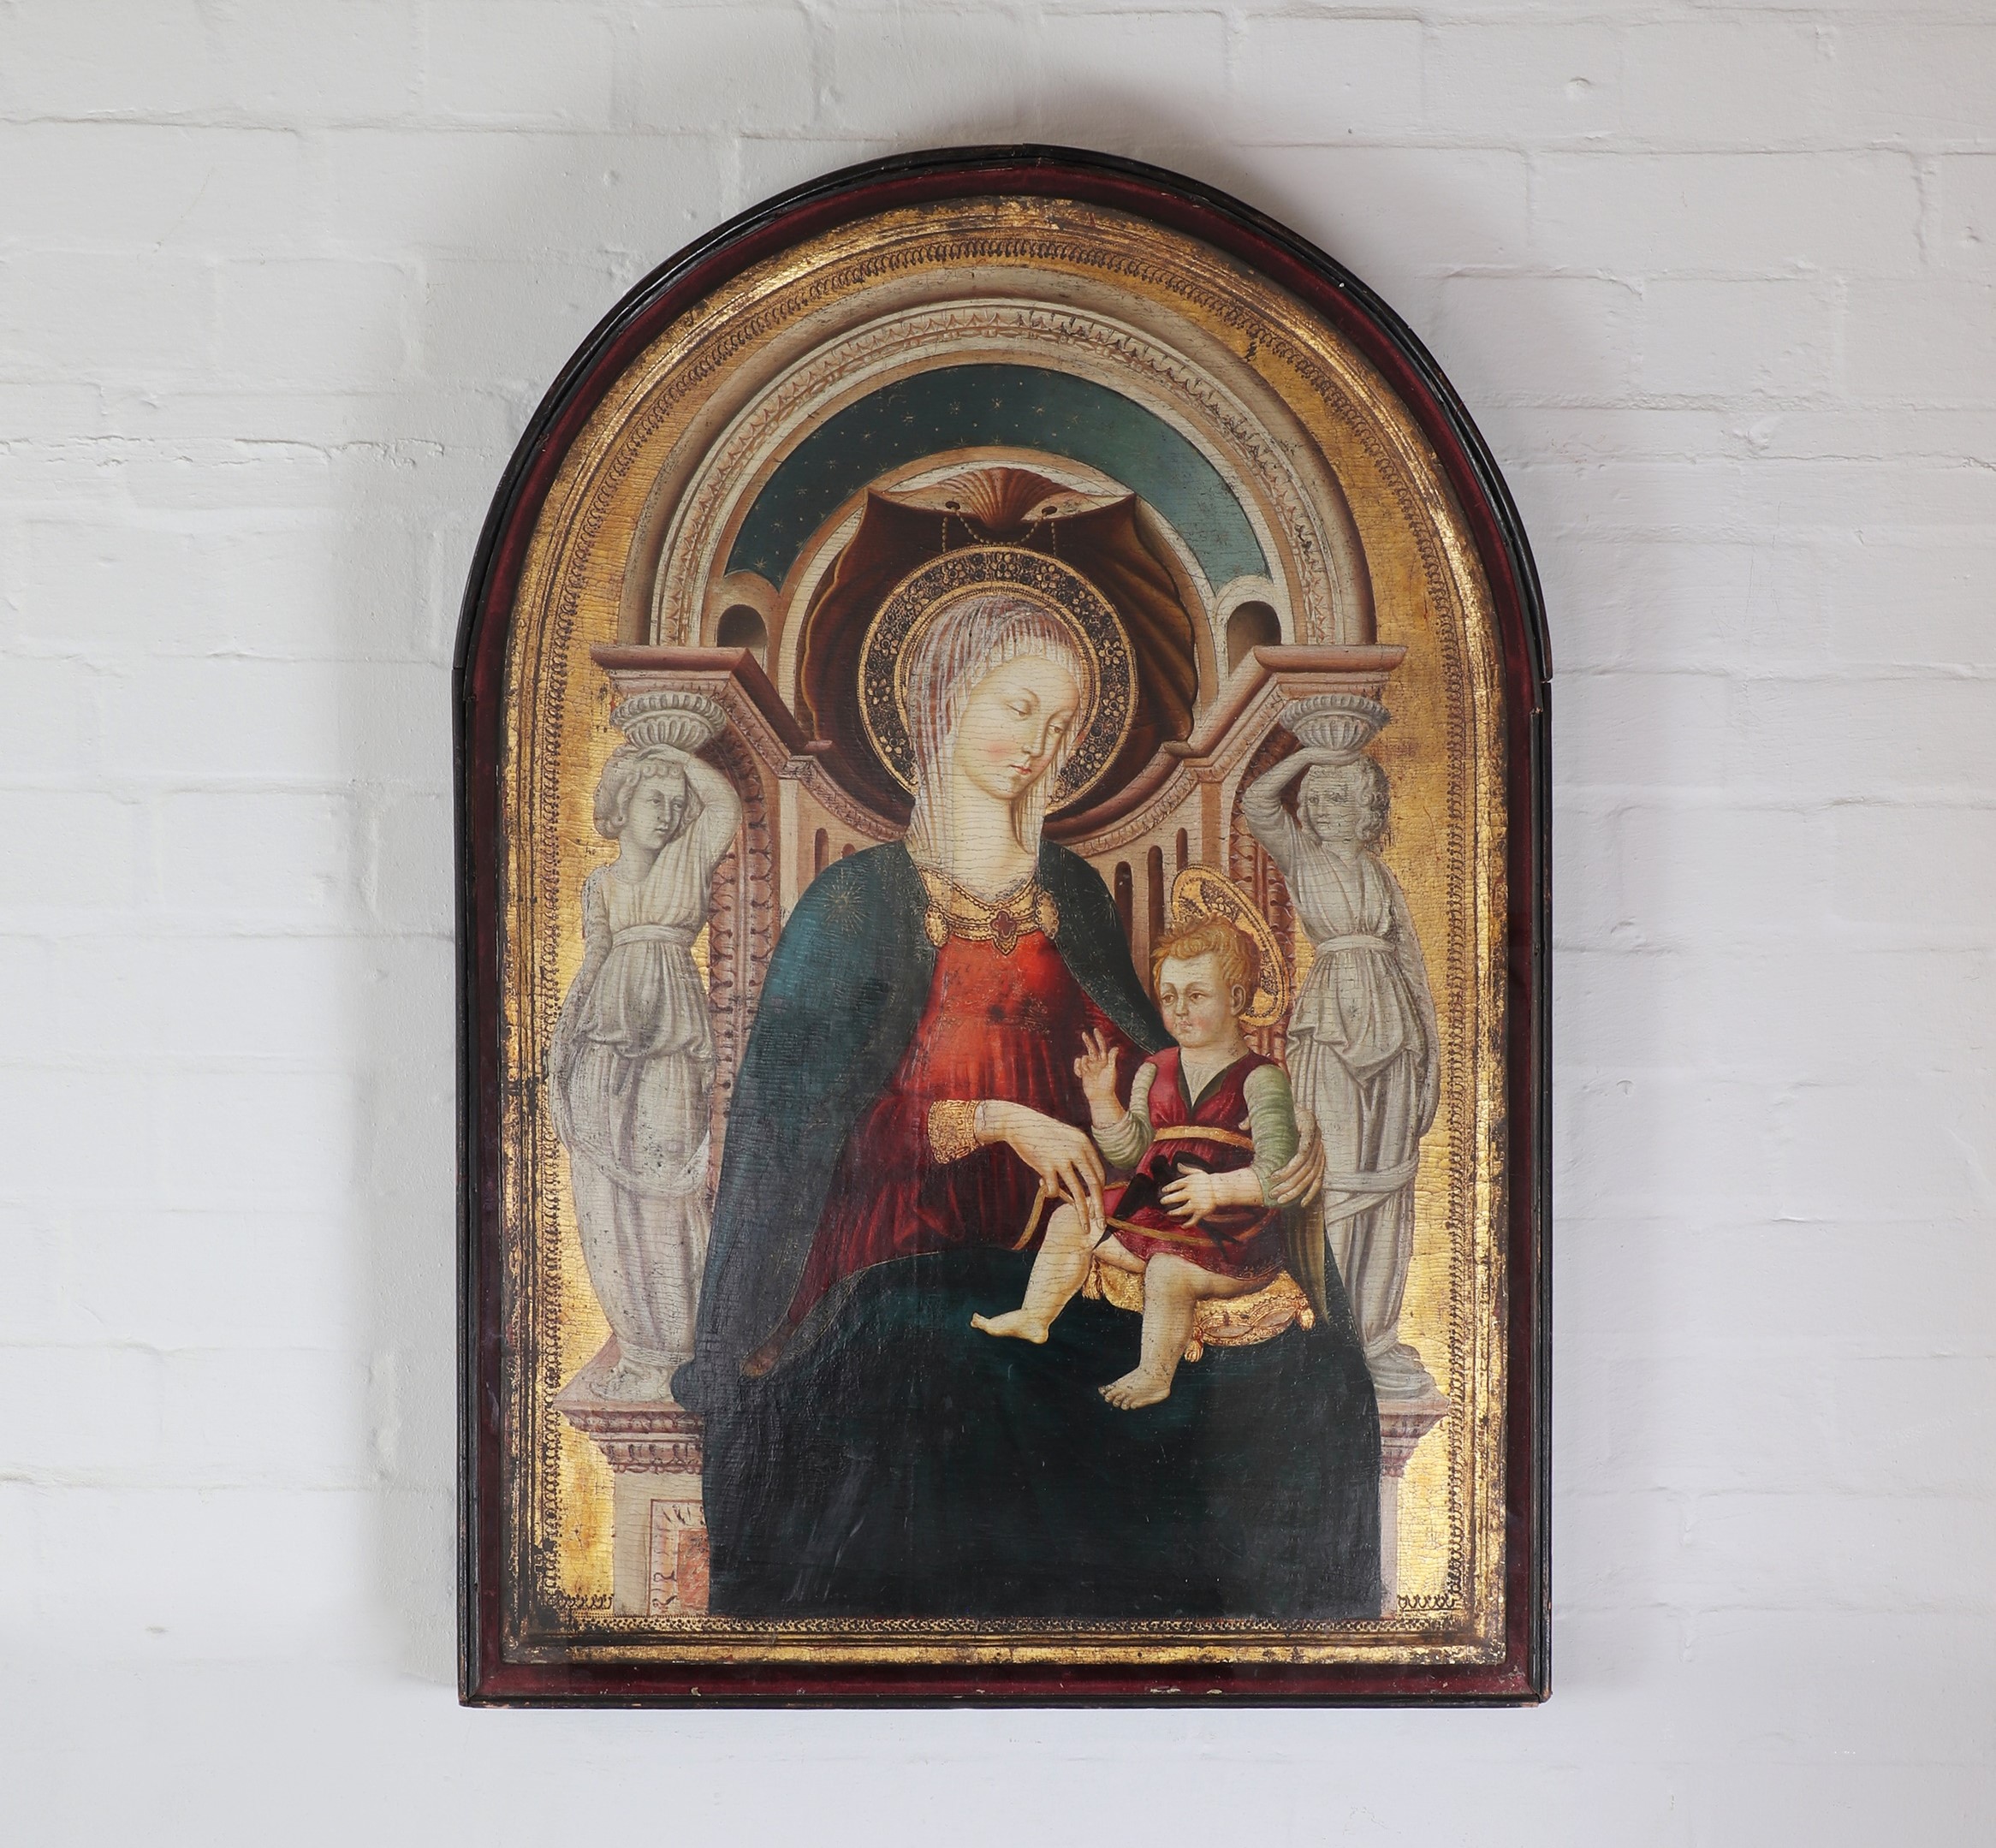 Follower of Neri di Bicci (Italian, 1418-1492) Madonna and Child enthroned egg tempera on panel with later oil additions, gilding and punchwork to the decorated edge and halo, arched top 88 x 62cm, within an integral frame (Sold for £20,800)